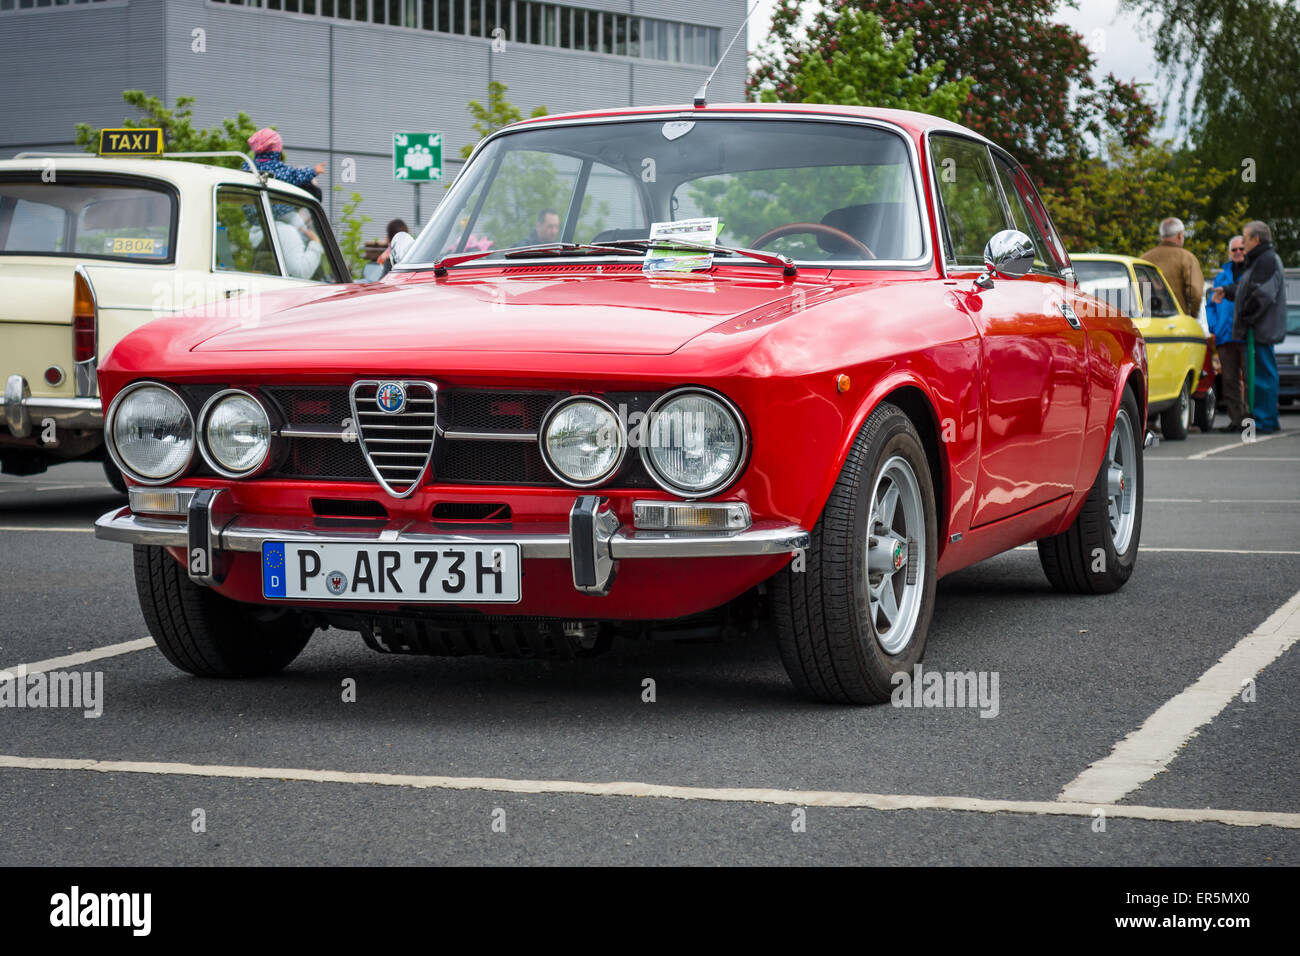 Alfa Gt High Resolution Stock Photography and Images - Alamy